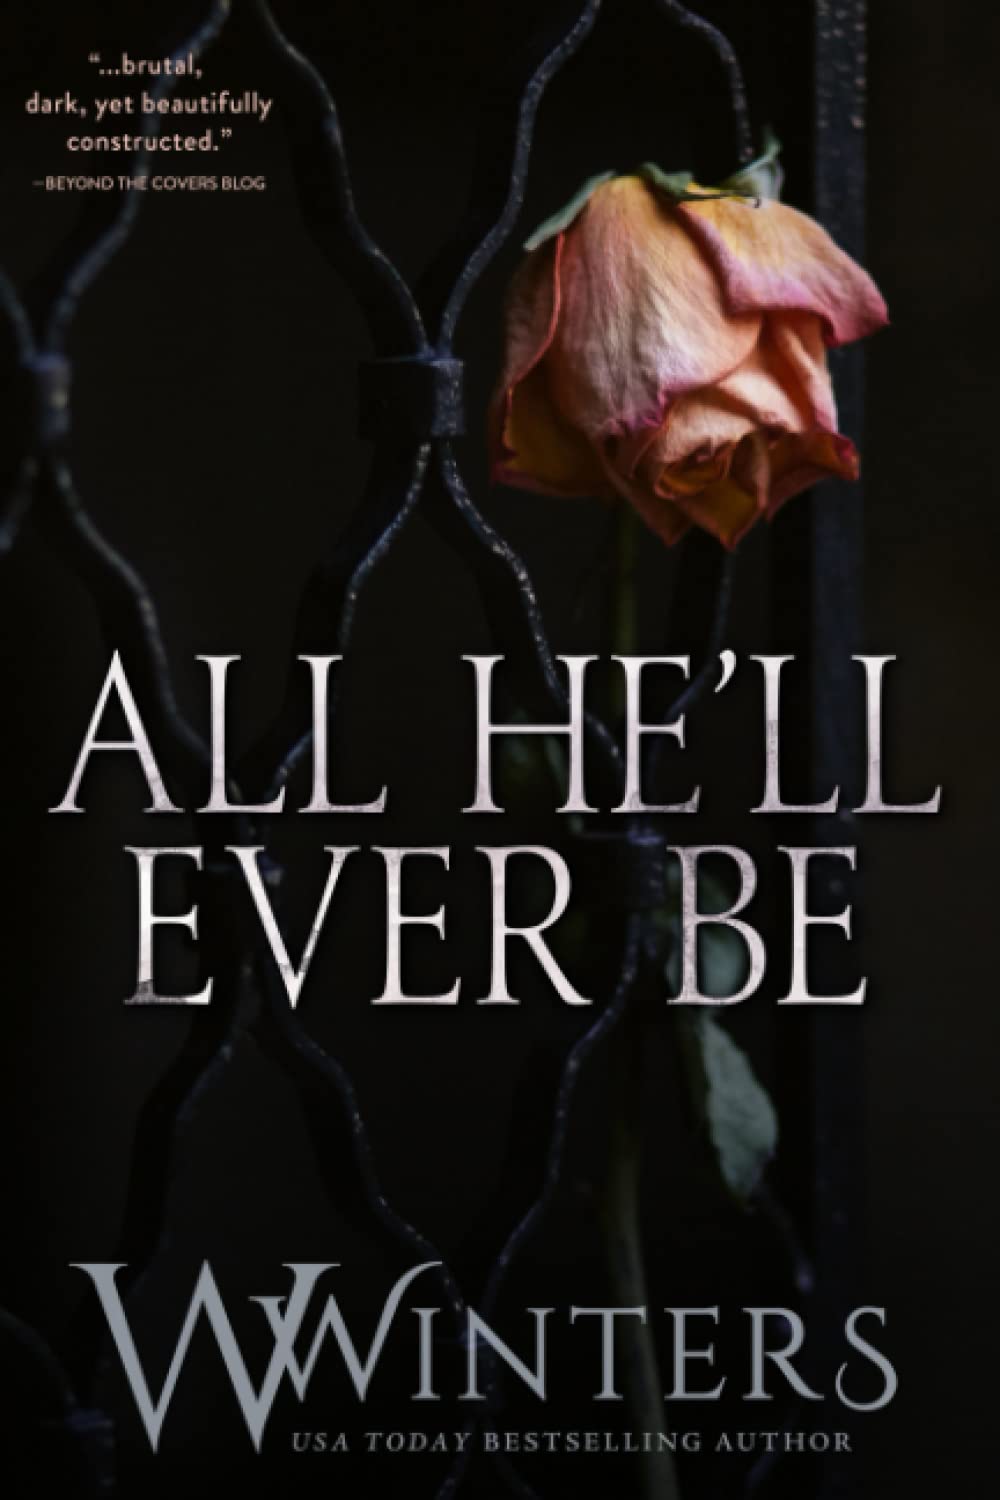 ALL HE'LL EVER BE By WILLOW WINTERS